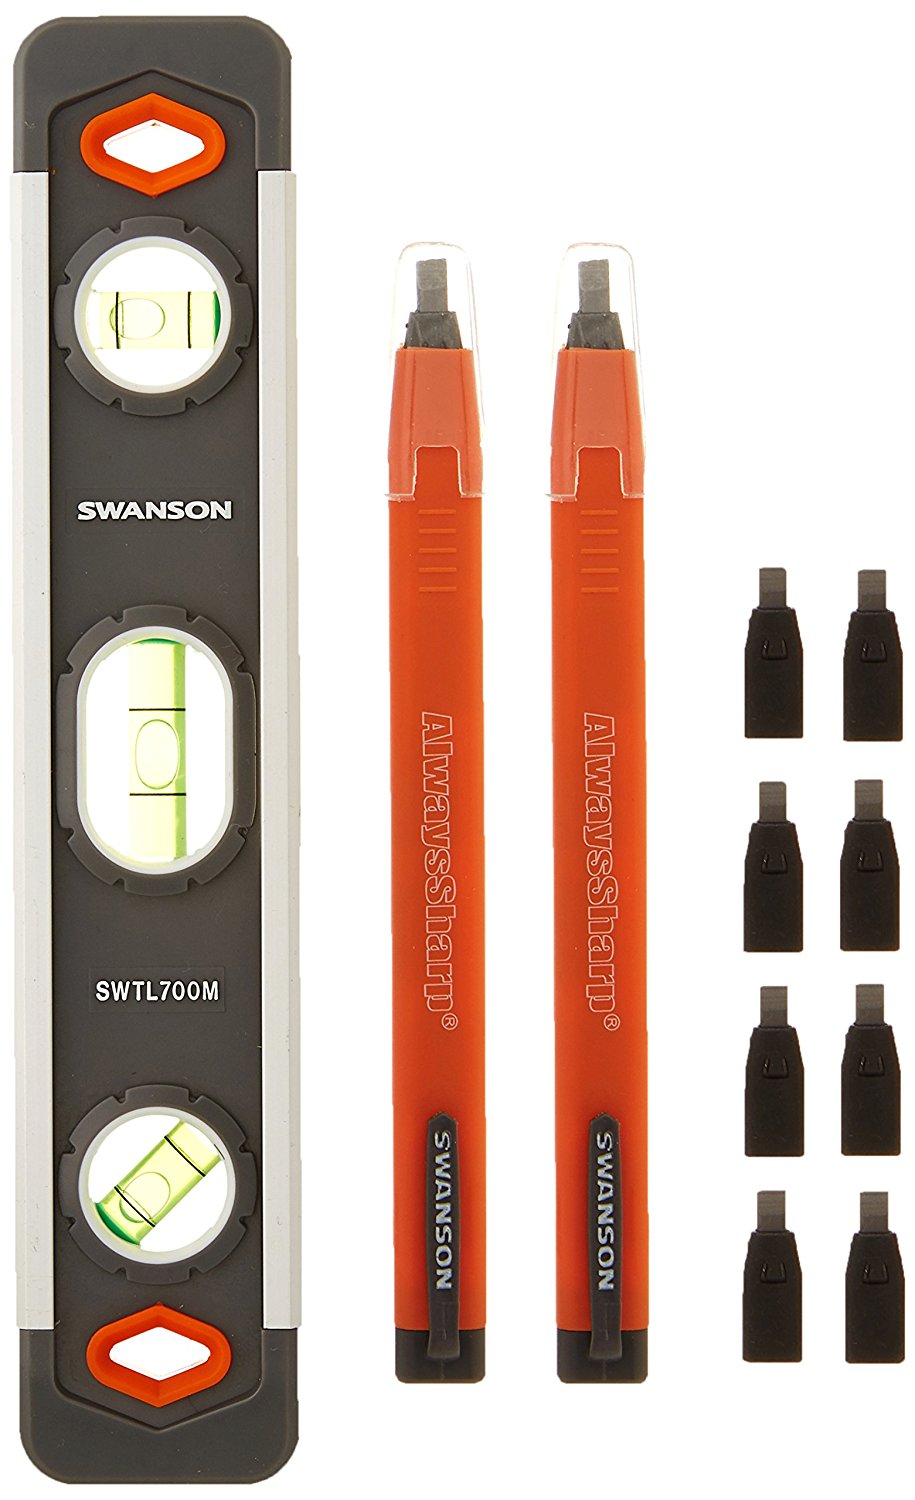 Swanson pack of 2 Mechanical Carpenter Pencils with 24 Lead Cartridges and a Magnetic Torpedo Level - image 1 of 1